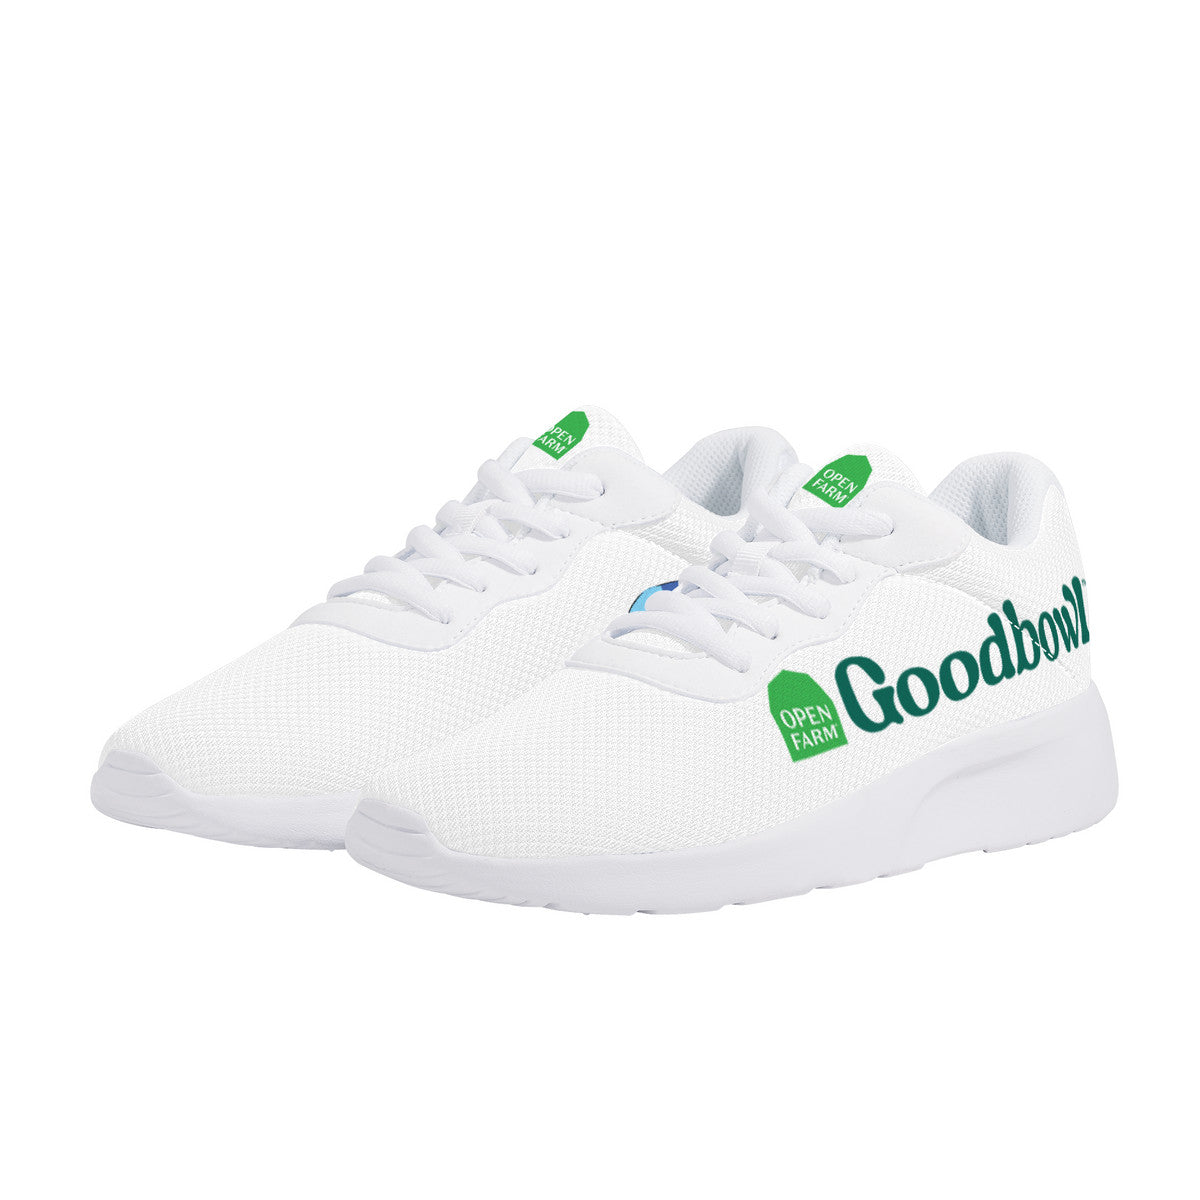 Goodbowl Sneakers | Customized Business Shoes | Shoe Zero